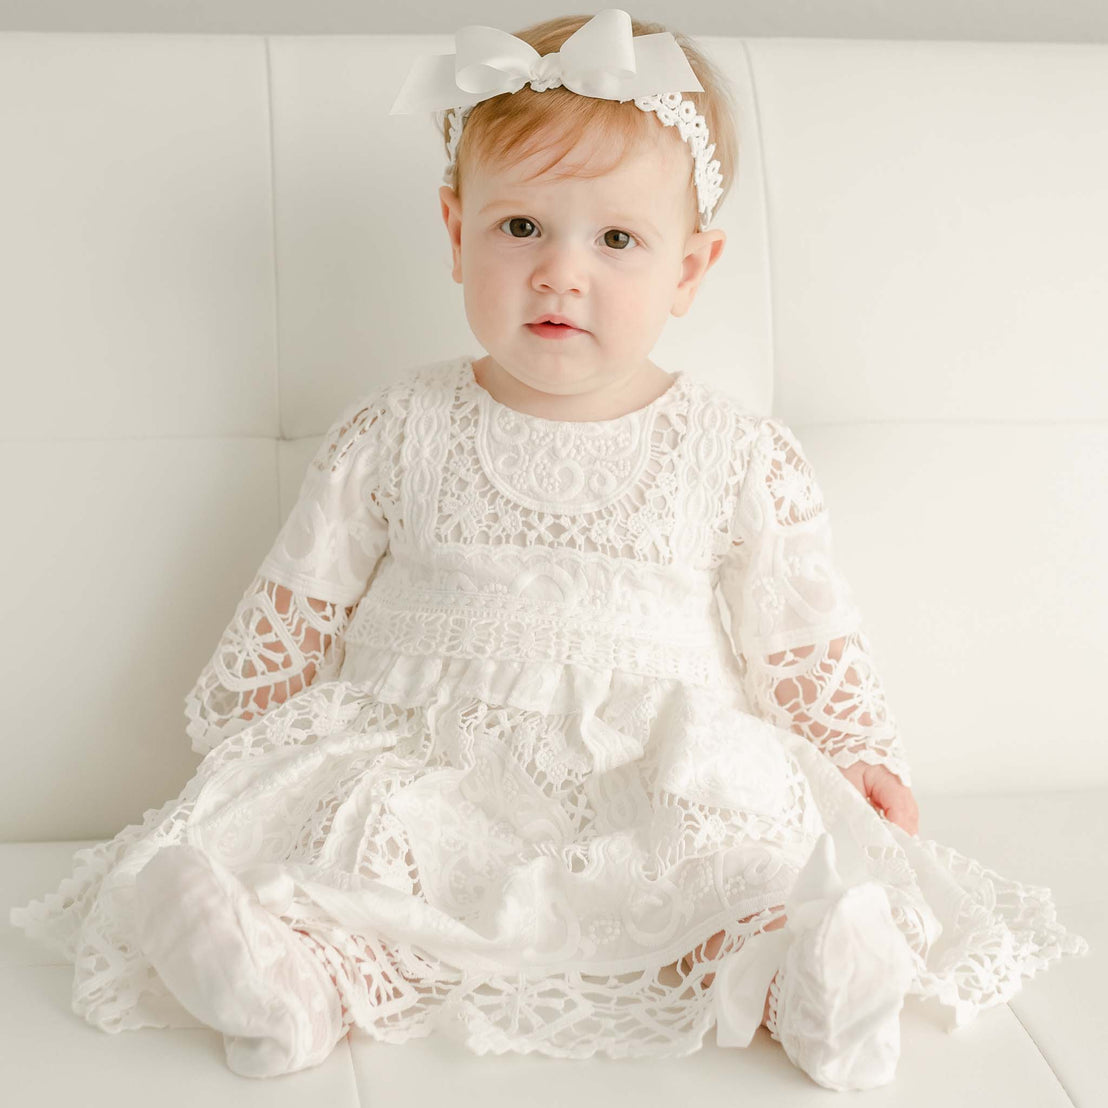 Baby girl with red hair sitting on couch wearing the Adeline lace christening dress and ribbon bow headband.